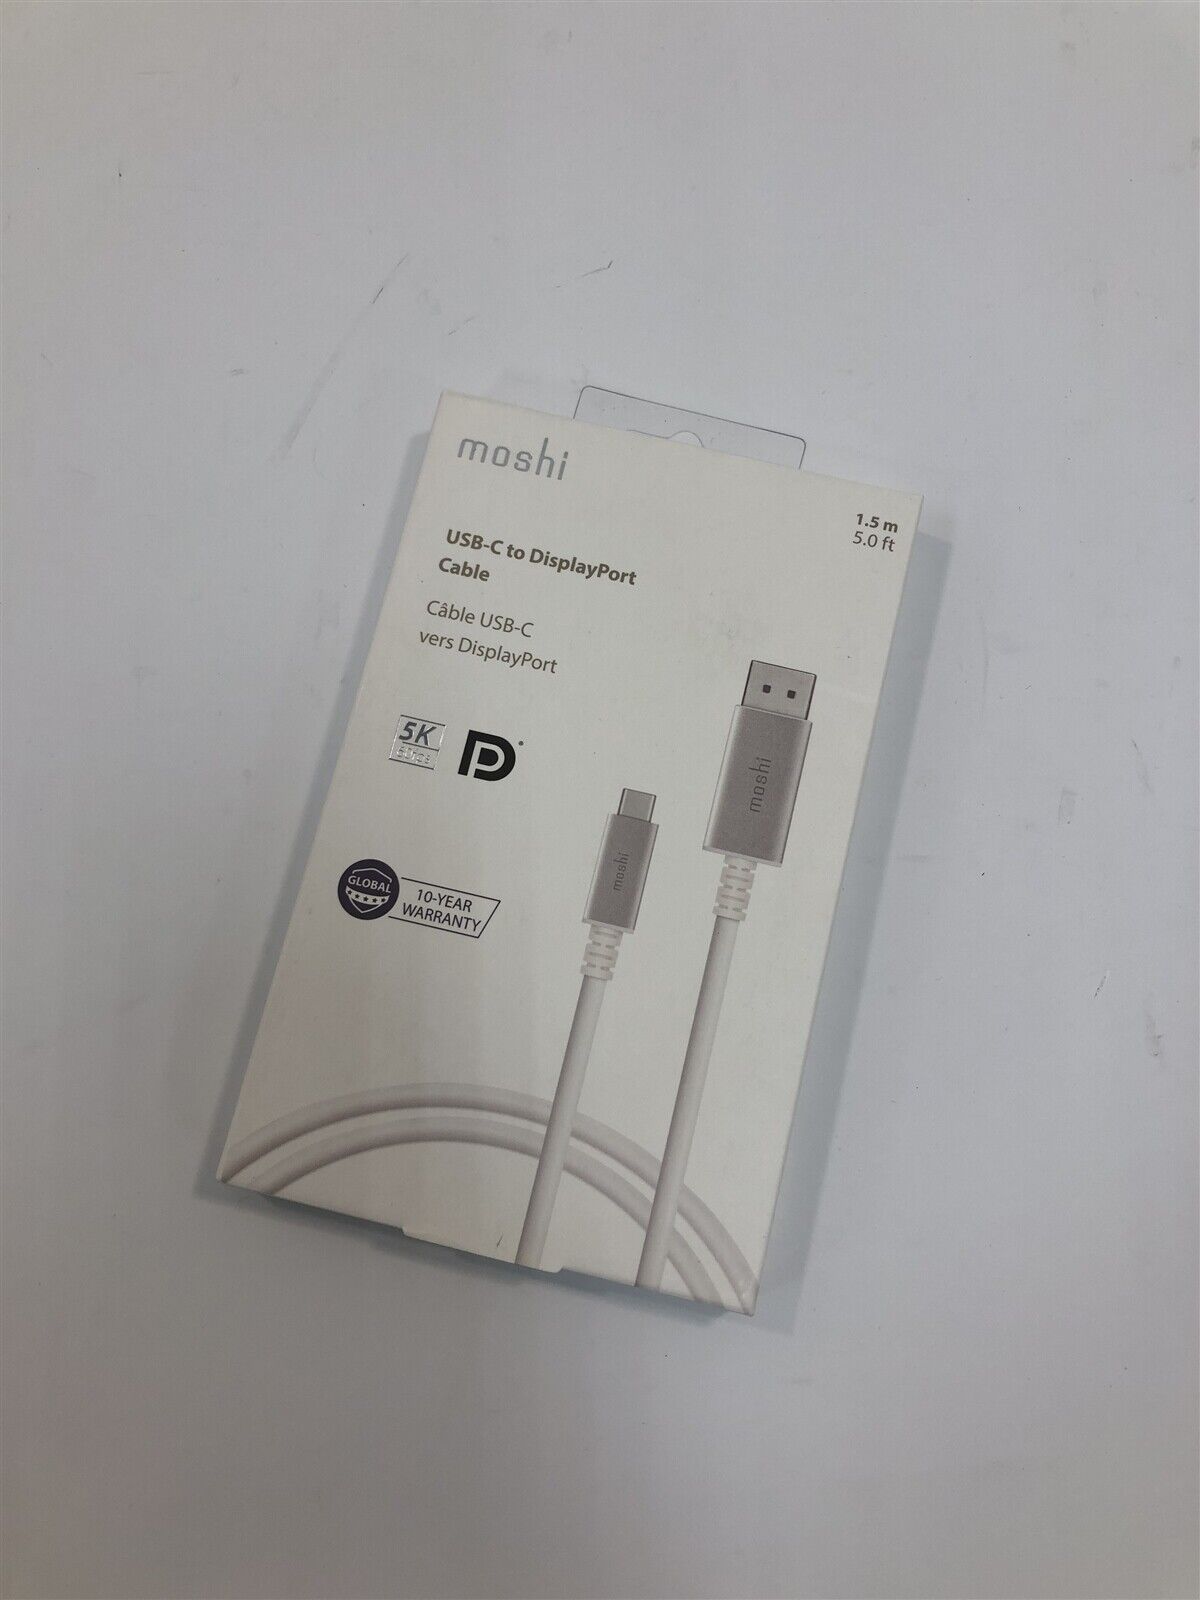 NEW Moshi USB-C to DisplayPort Cable 1.5m/5ft #99M0084102